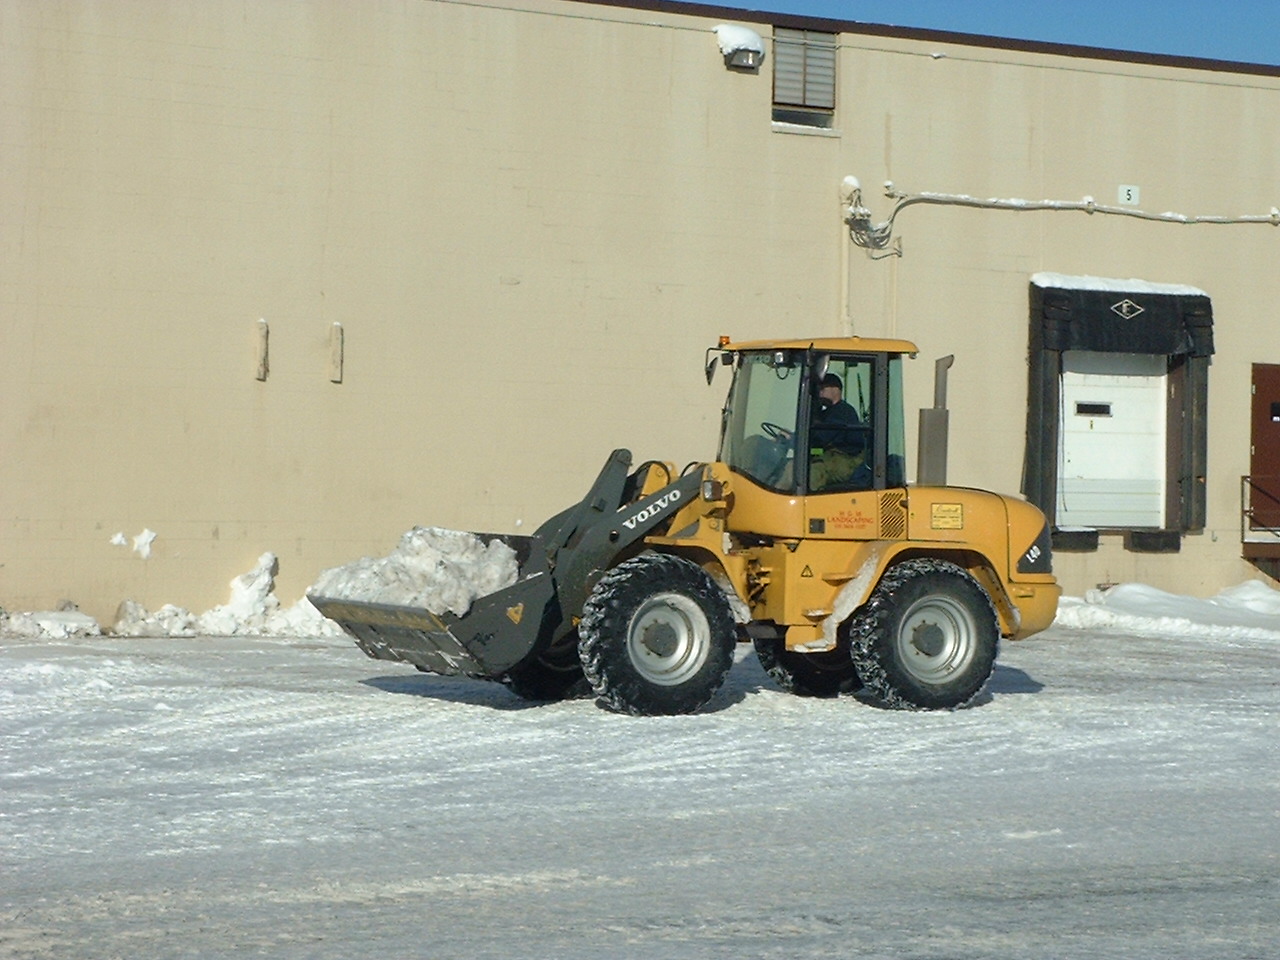 Front End Loader Used for Snow Removal in Parking Lot